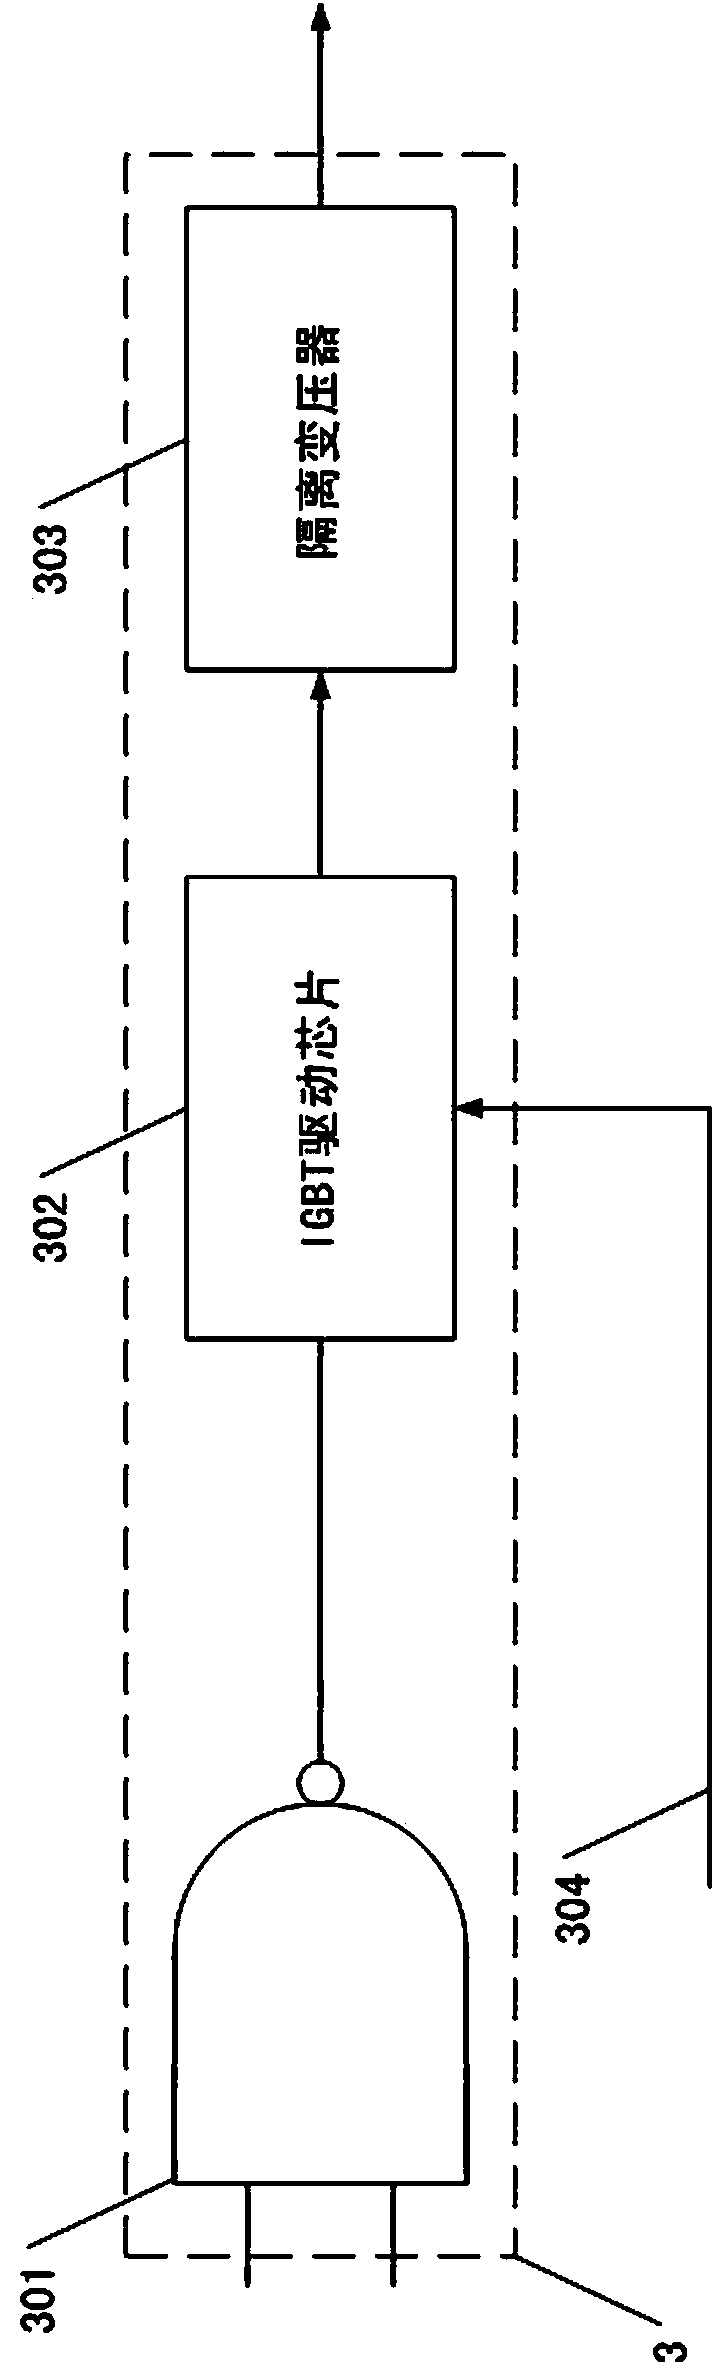 Parallel connection type active power filter